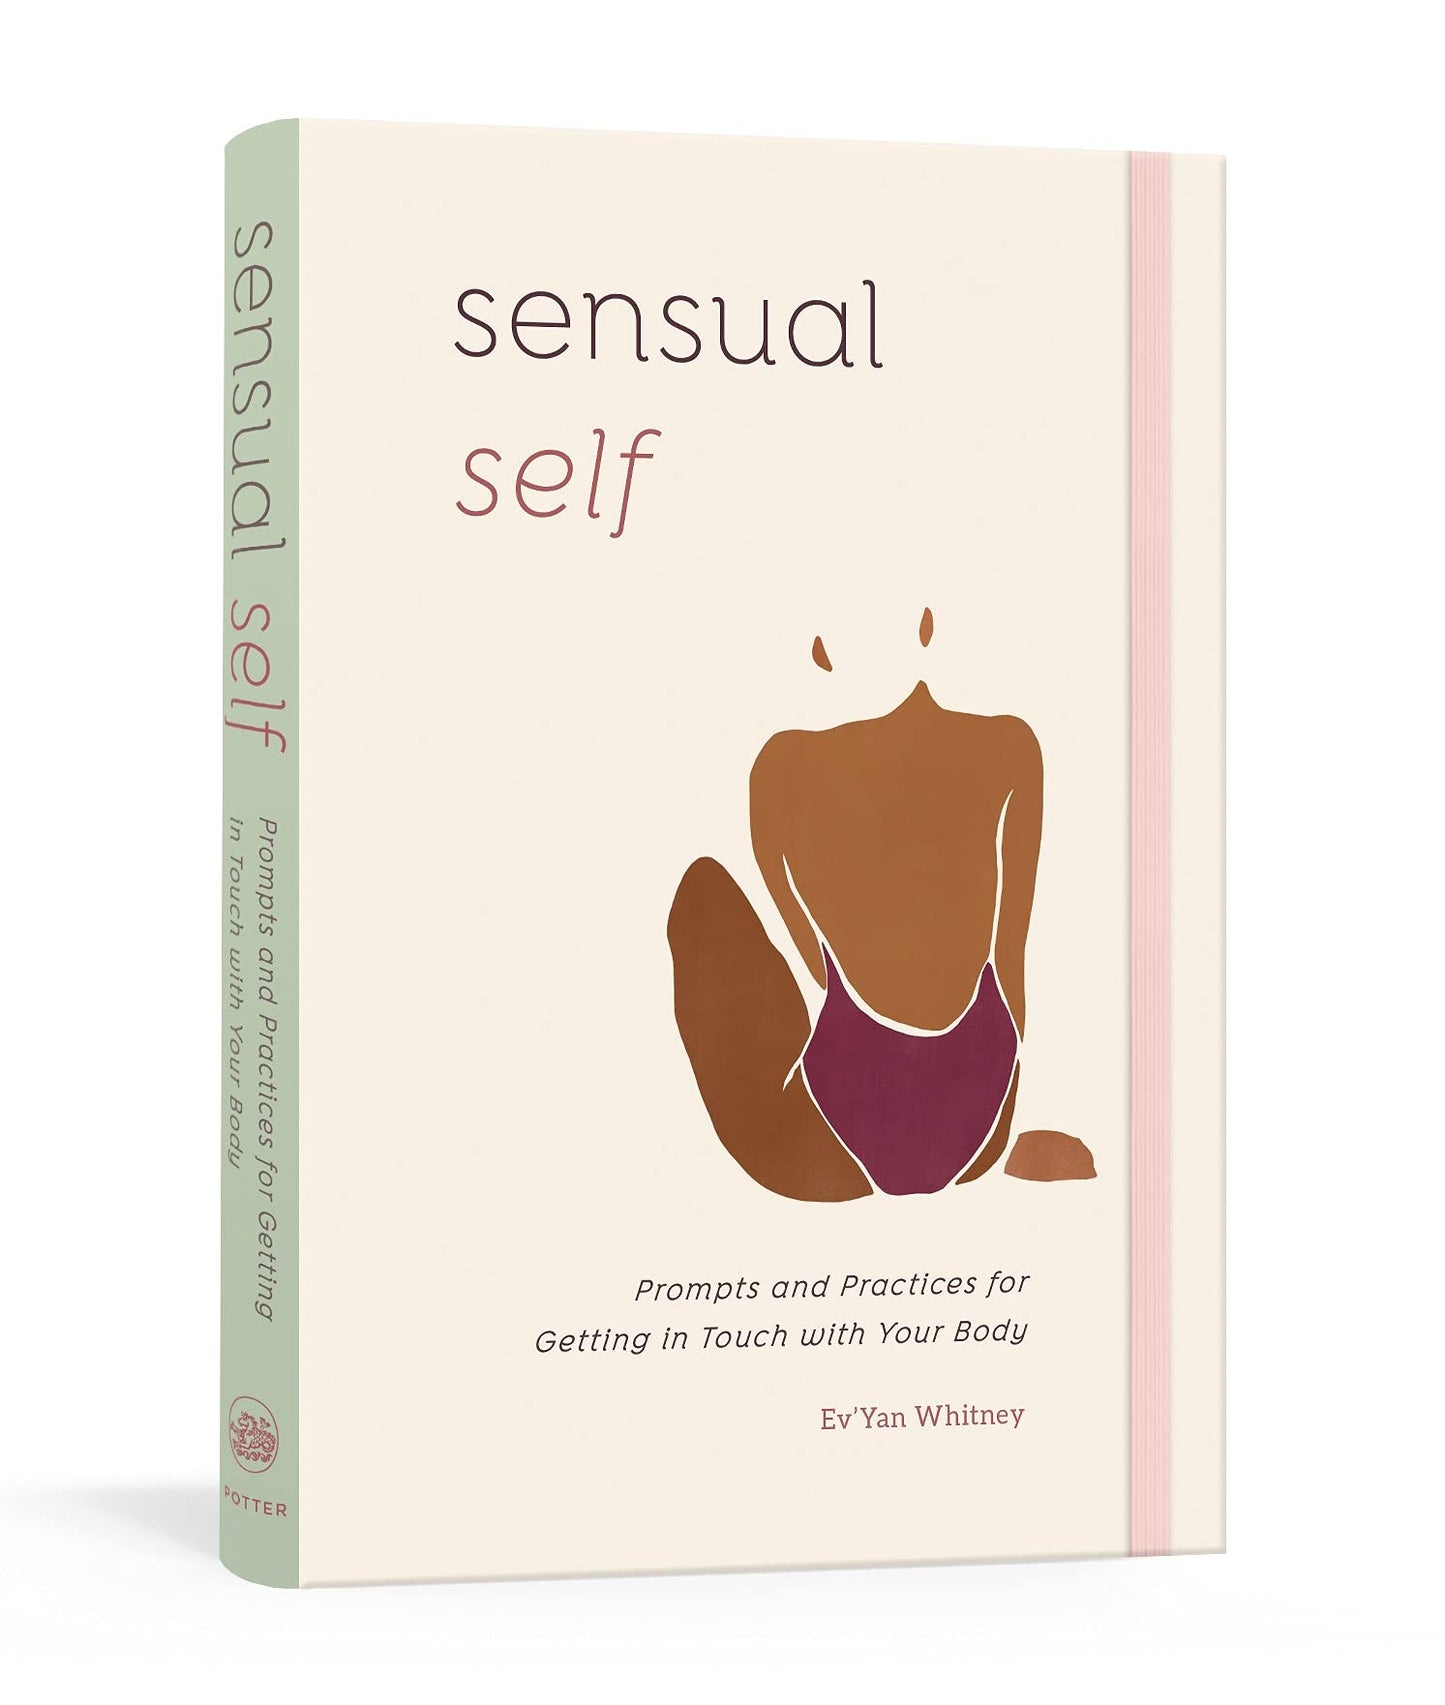 Sensual Self // Prompts and Practices for Getting in Touch with Your Body: A Guided Journal